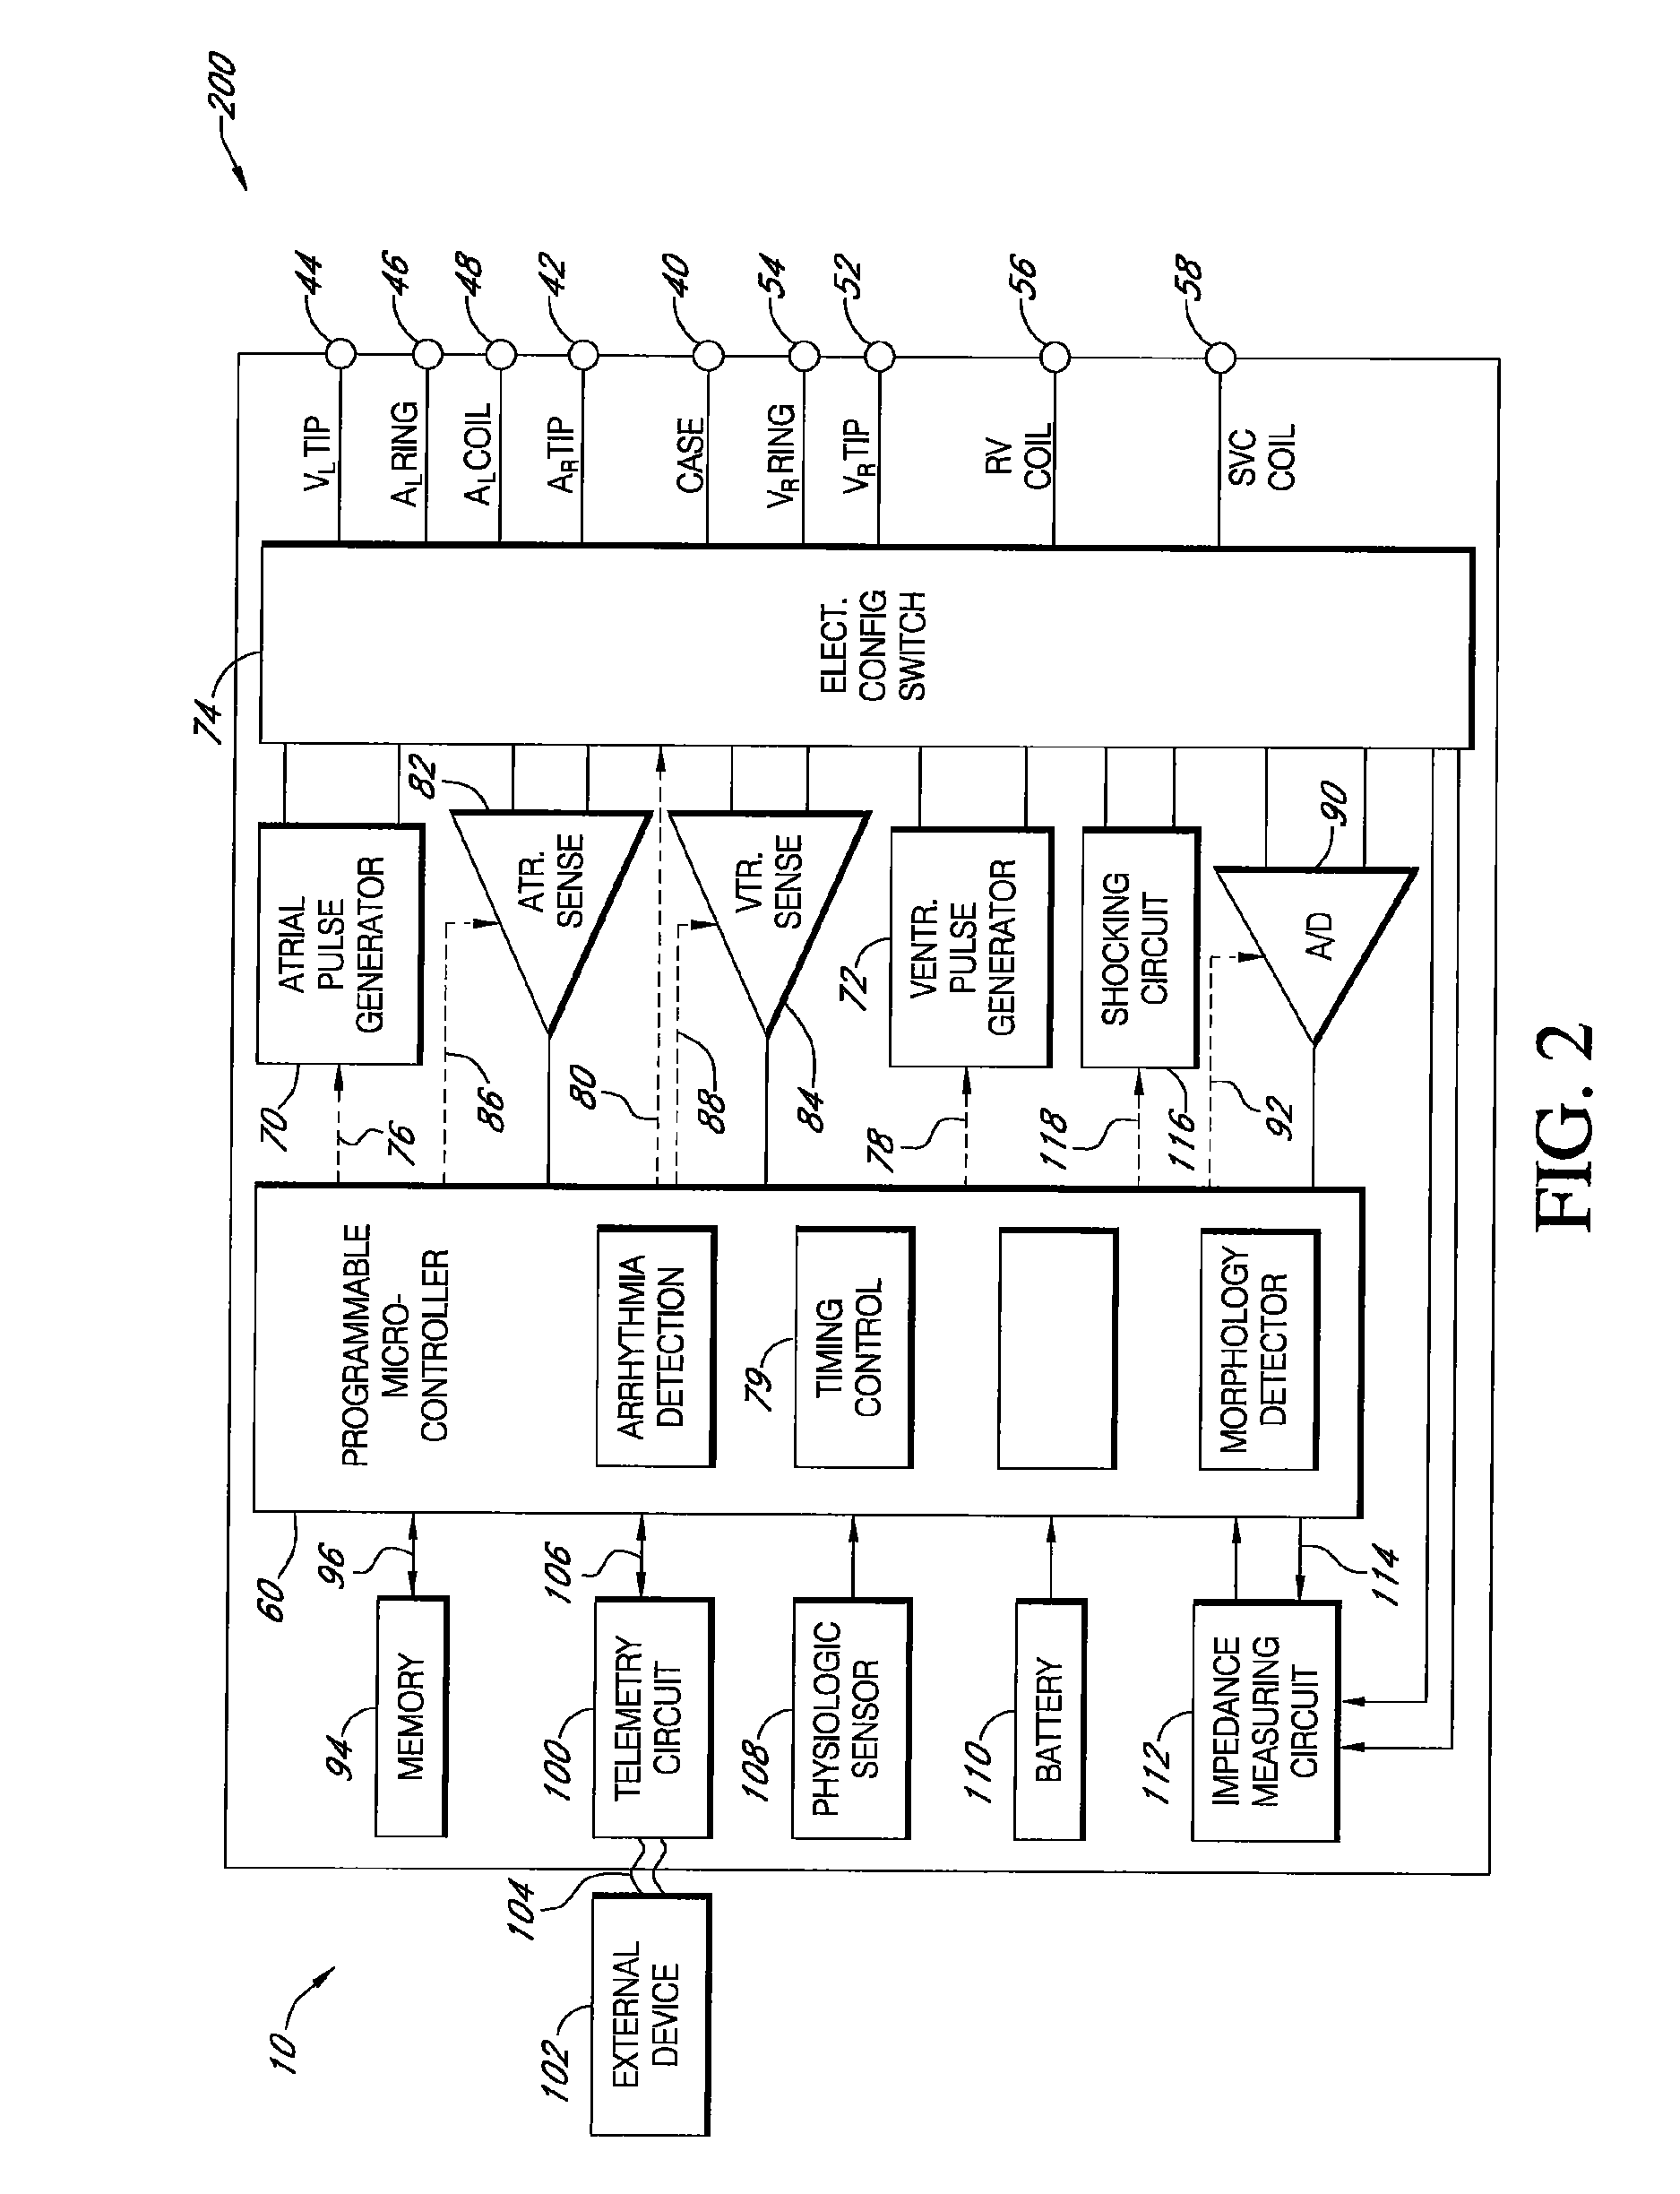 Implantable therapeutic device control system